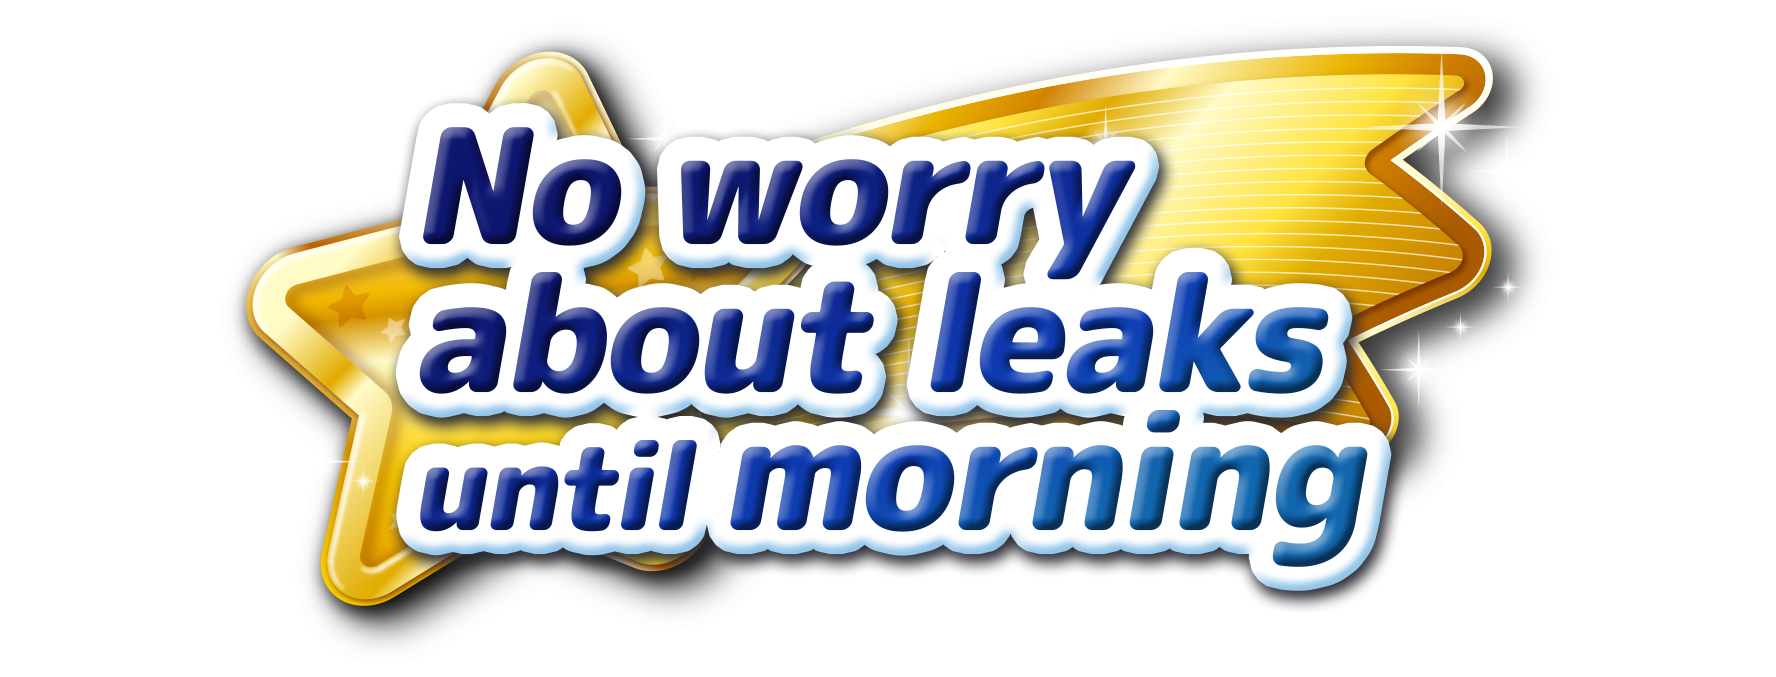 No worry about leaks until morning